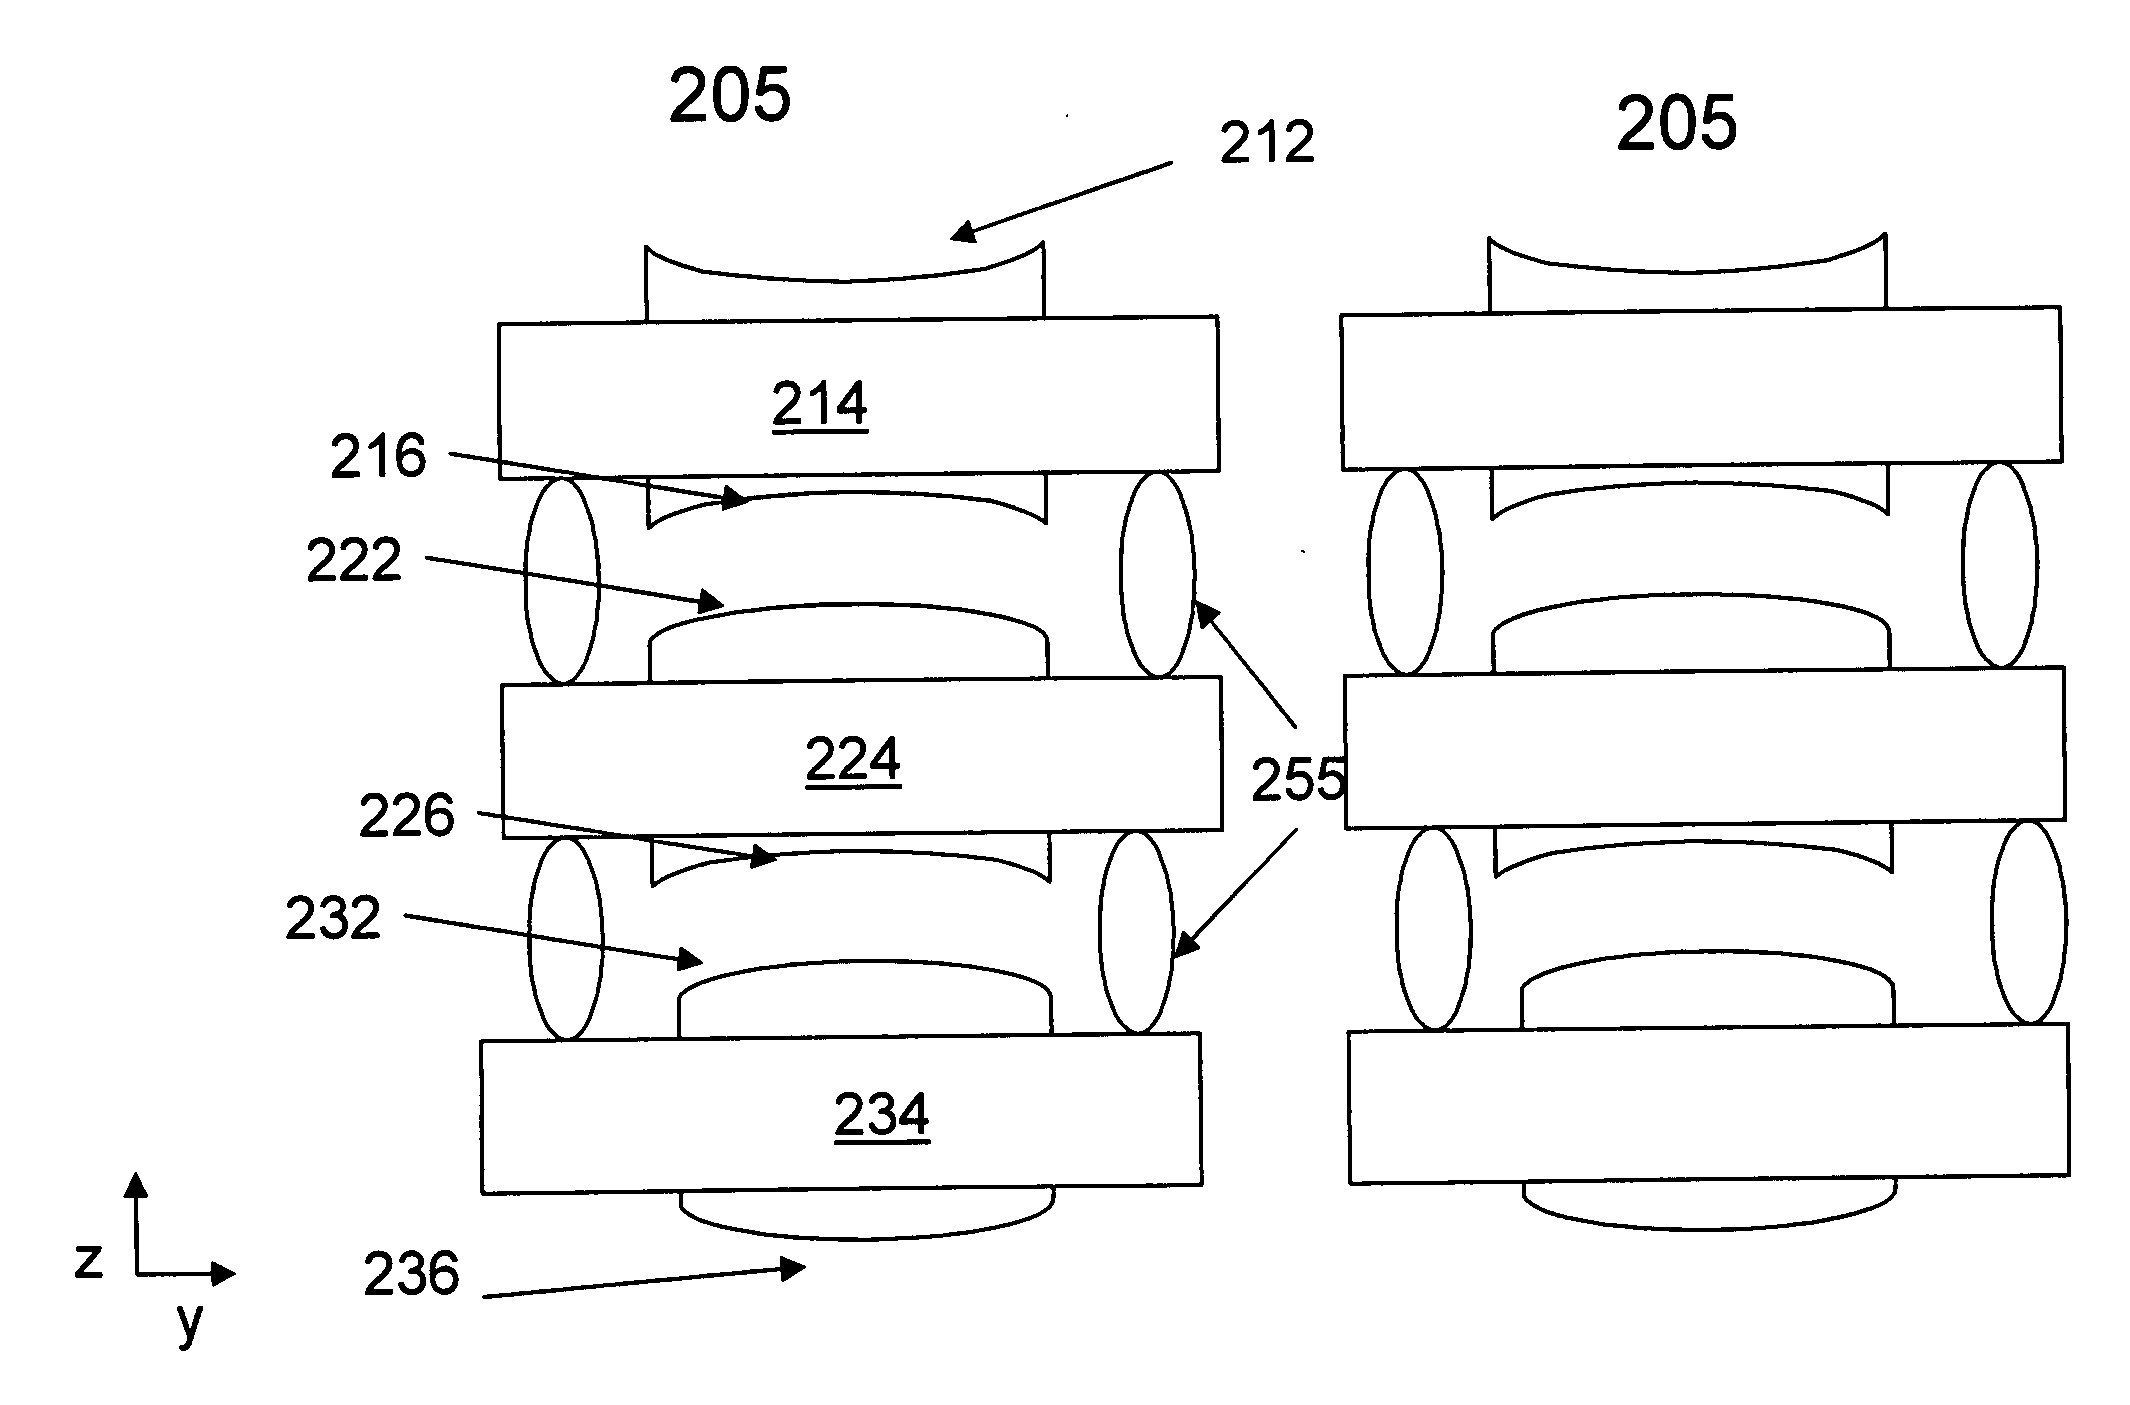 Optical device and associated methods